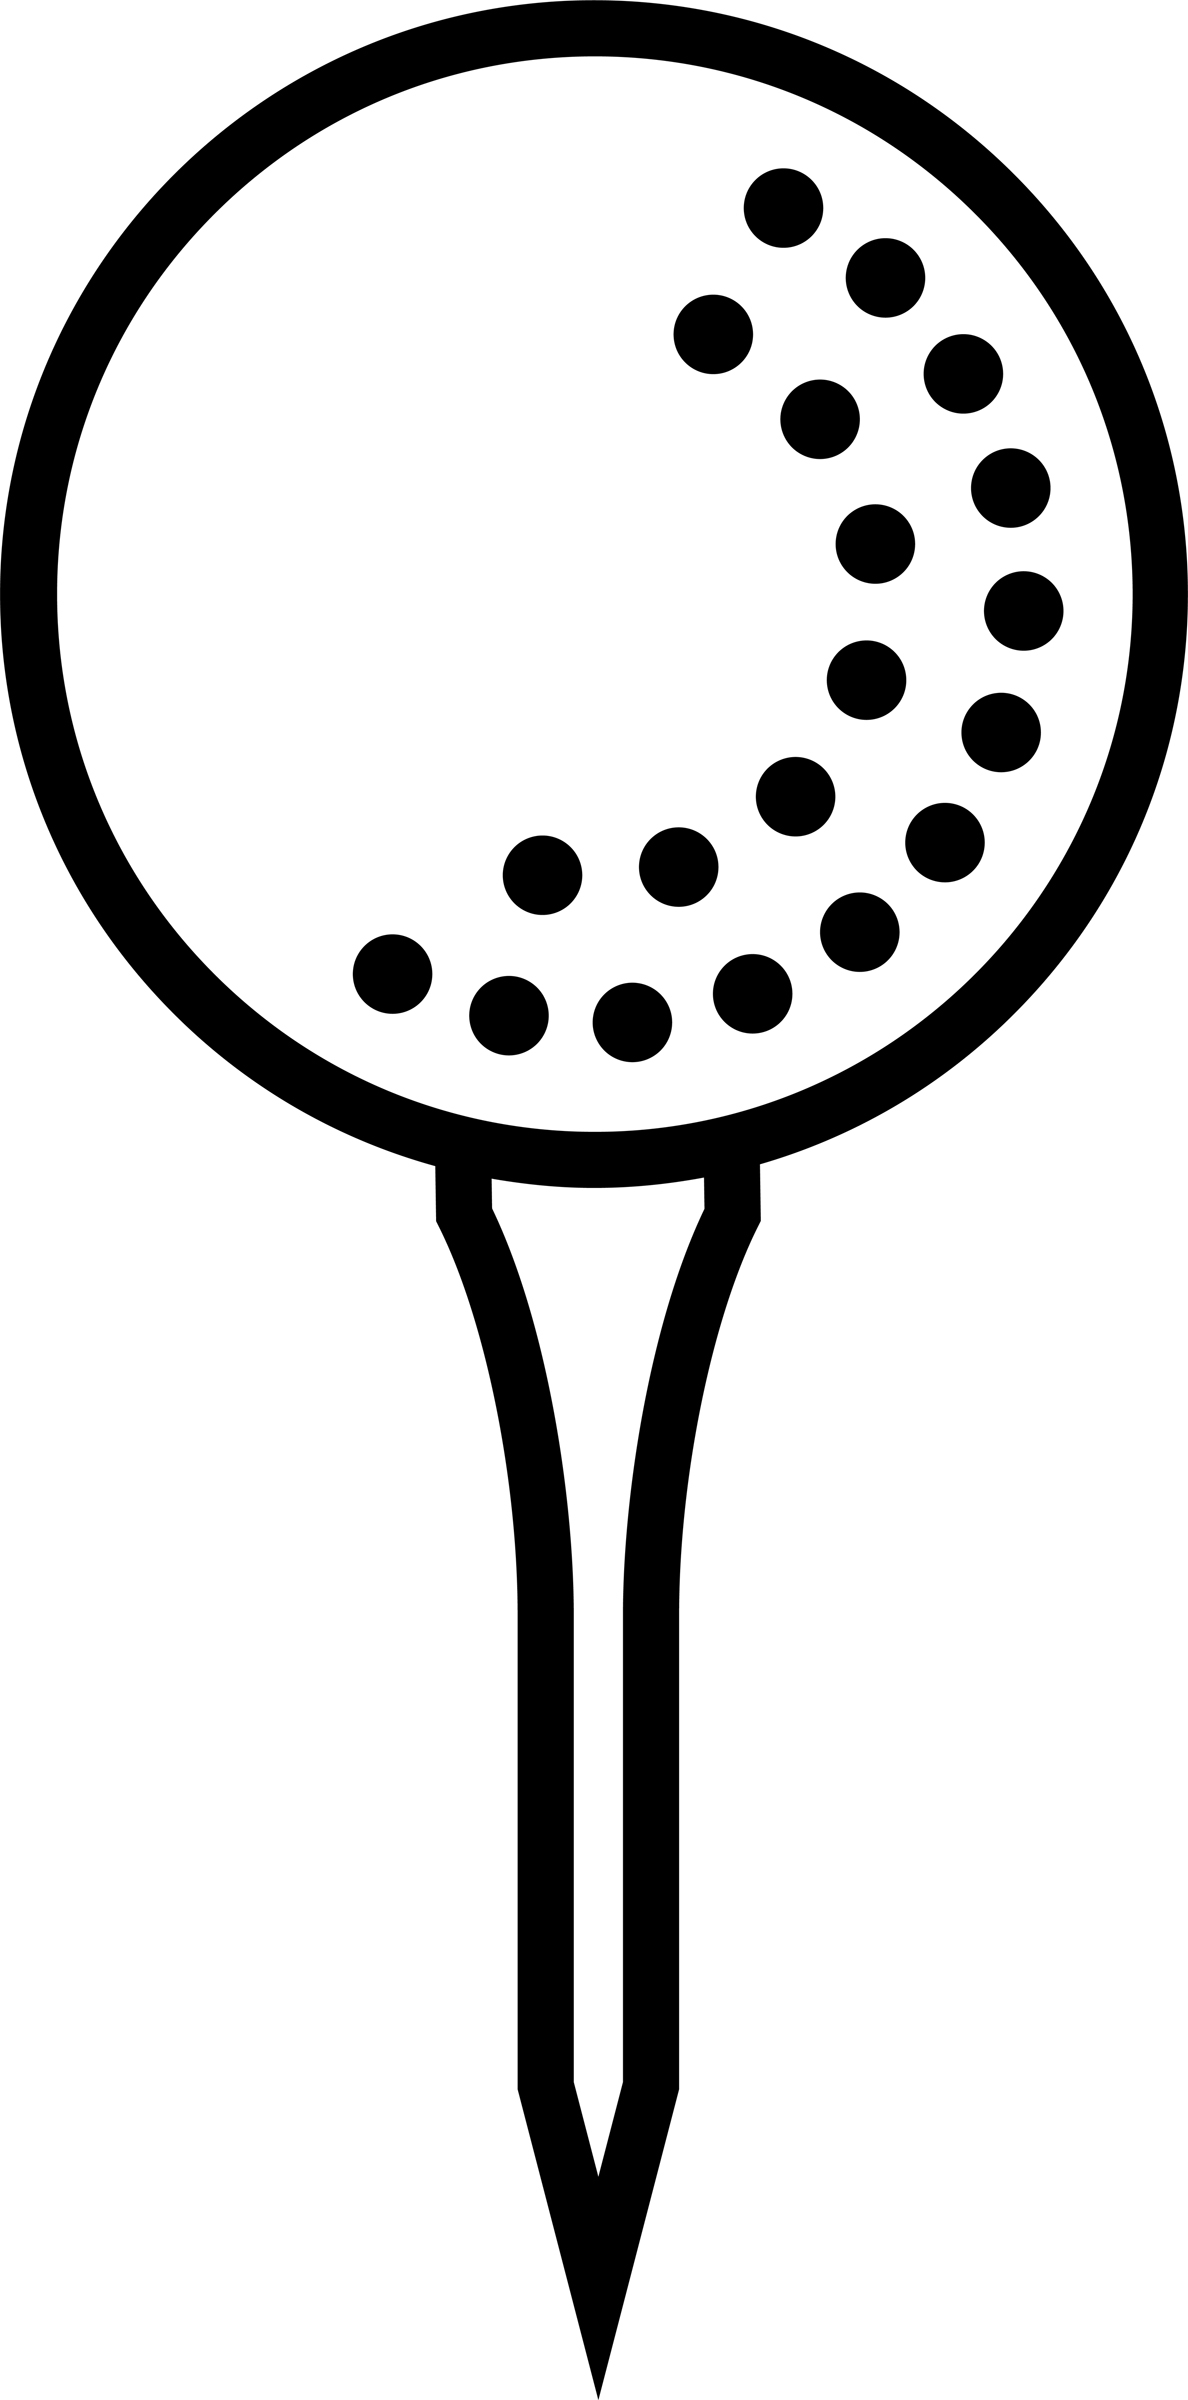 free black and white golf ball clipart - photo #12